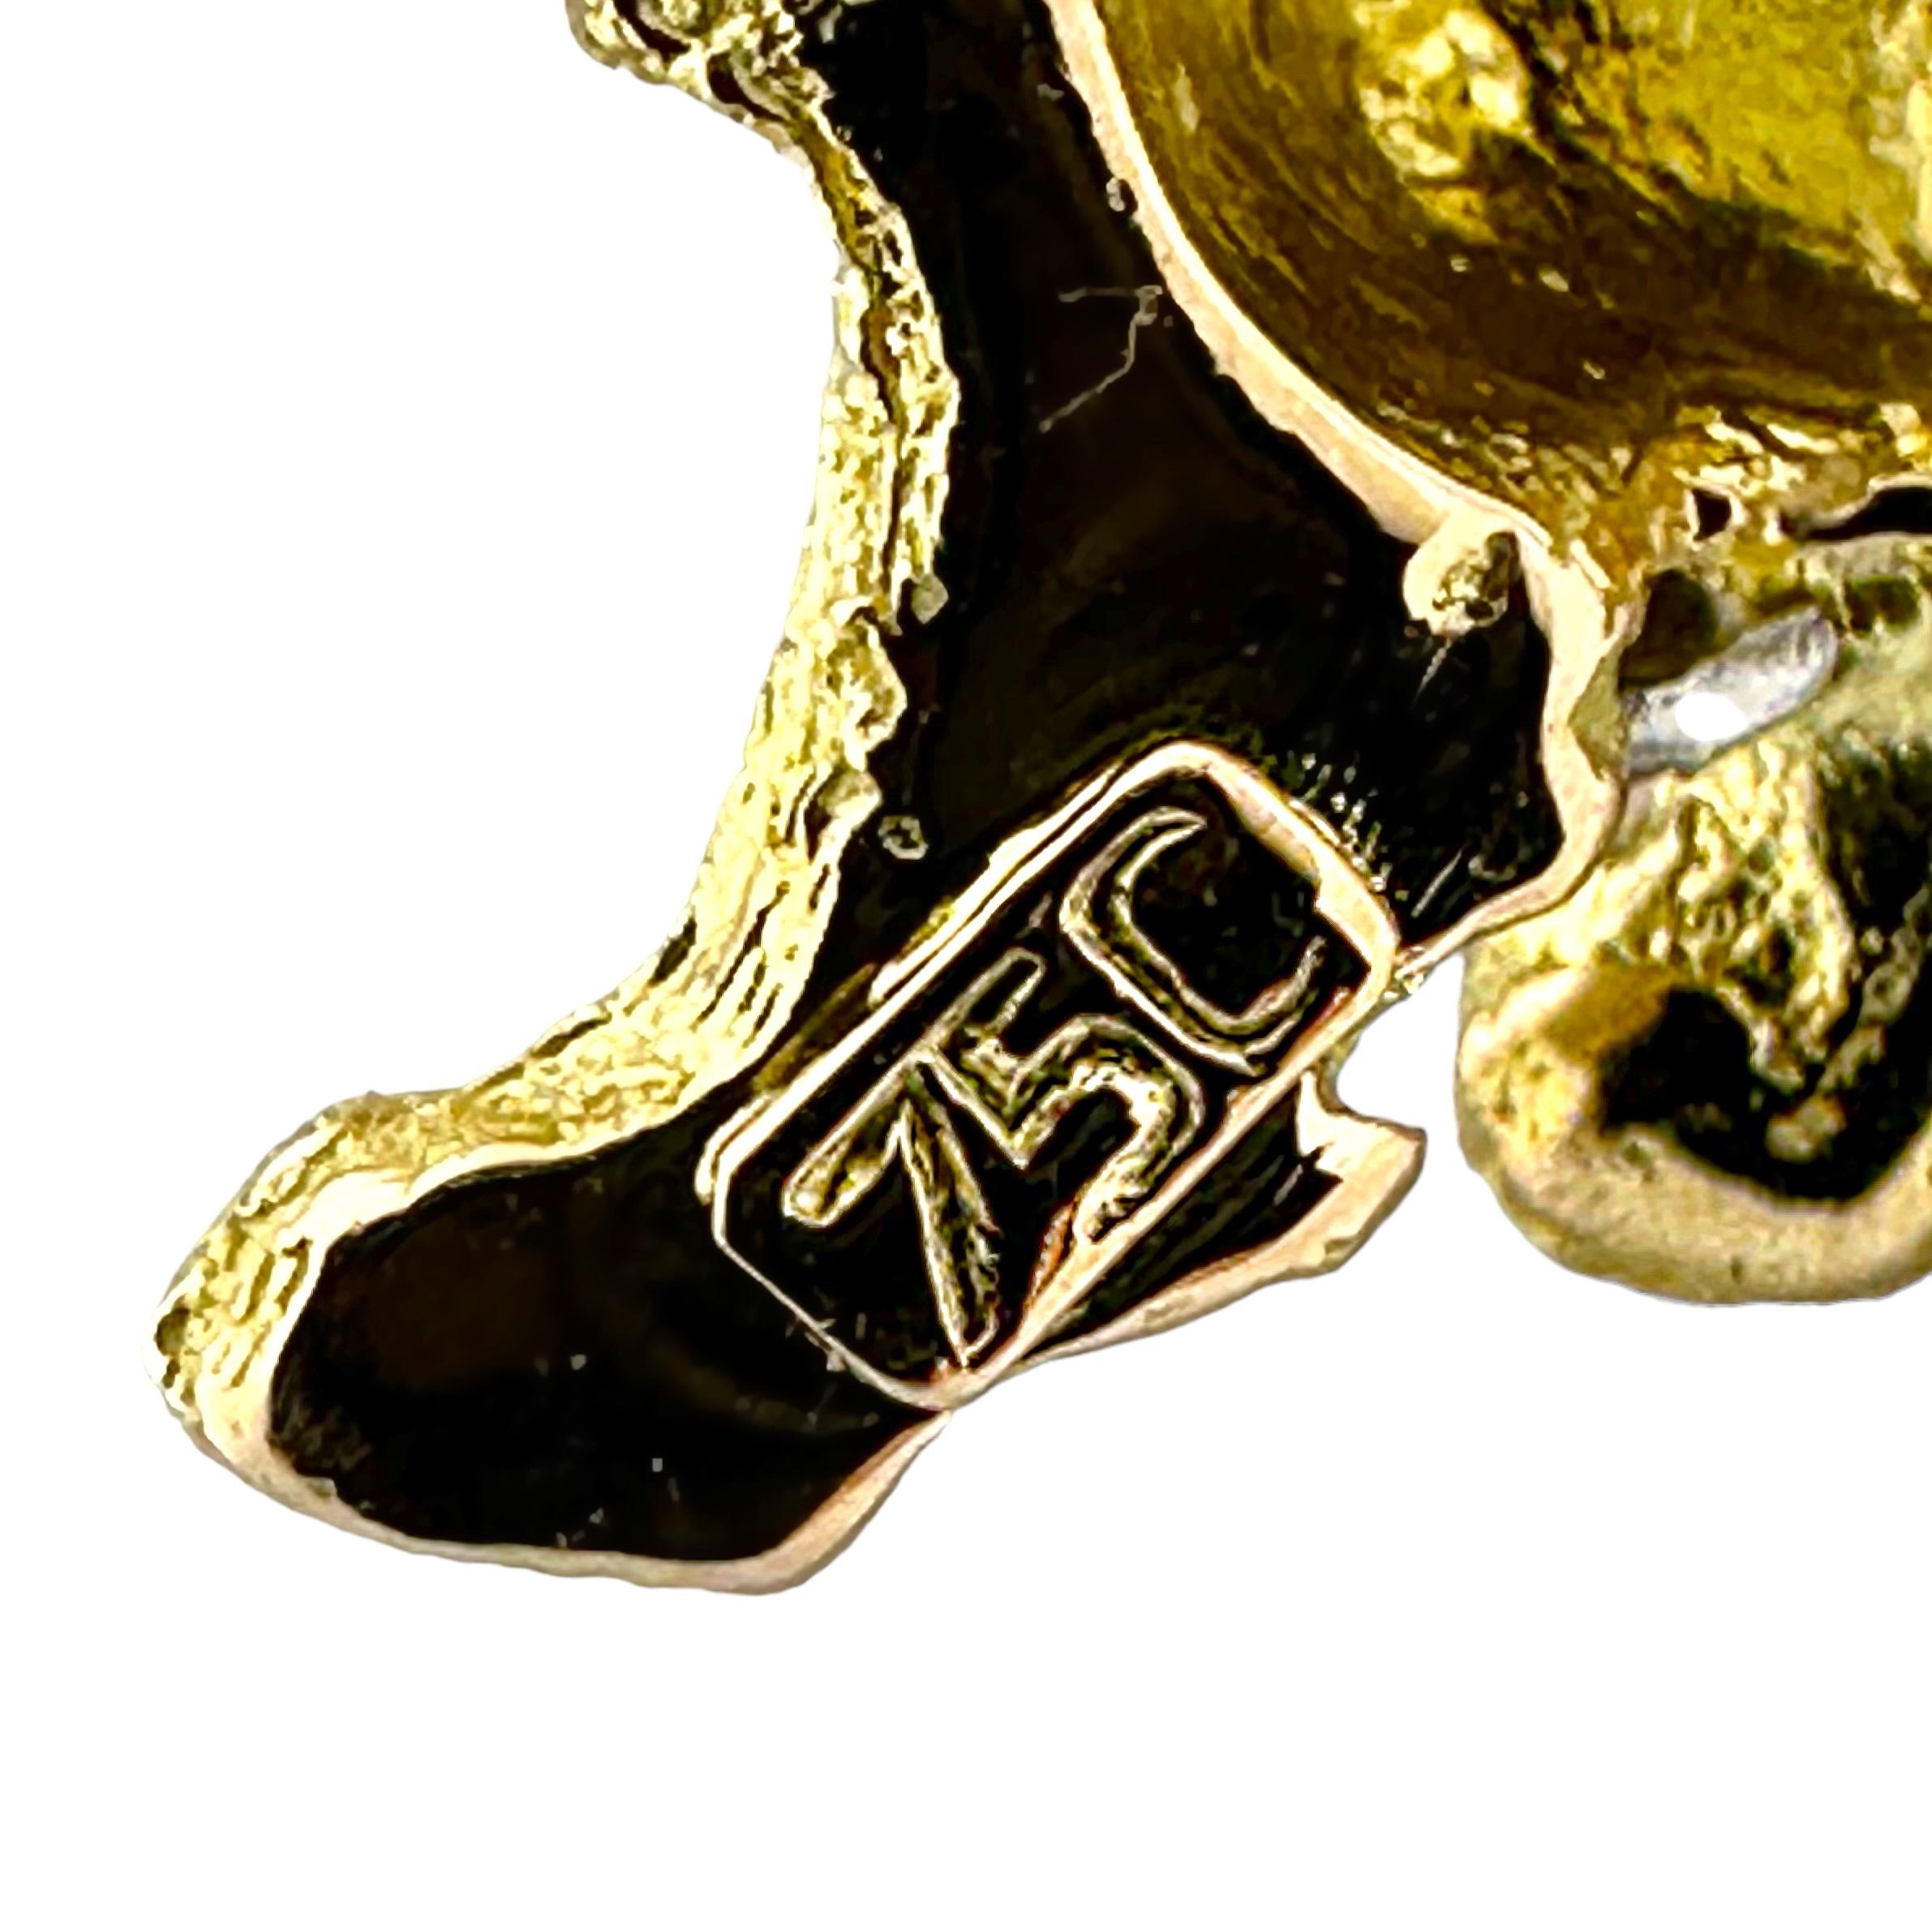 Adorable Puppy Brooch in 18K Yellow Gold with Sapphire Eyes & Ruby Tongue 4